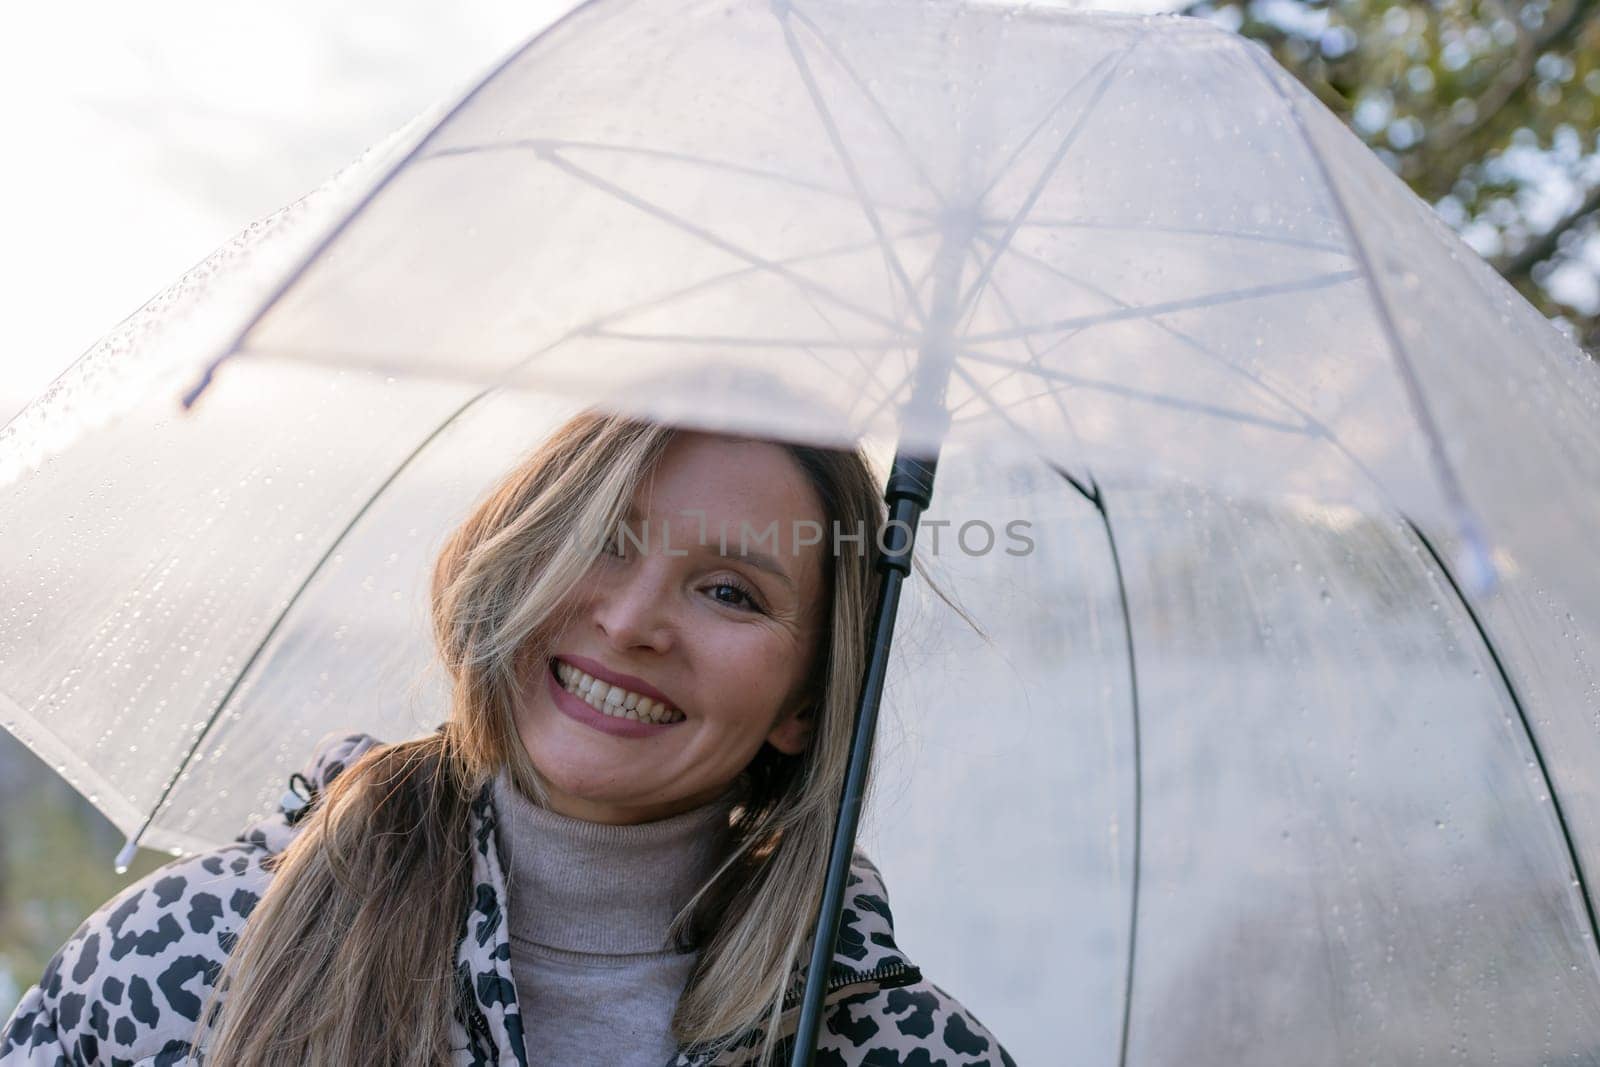 A woman is smiling under a clear umbrella. The umbrella is white and has a black handle. The woman is wearing a jacket and a scarf